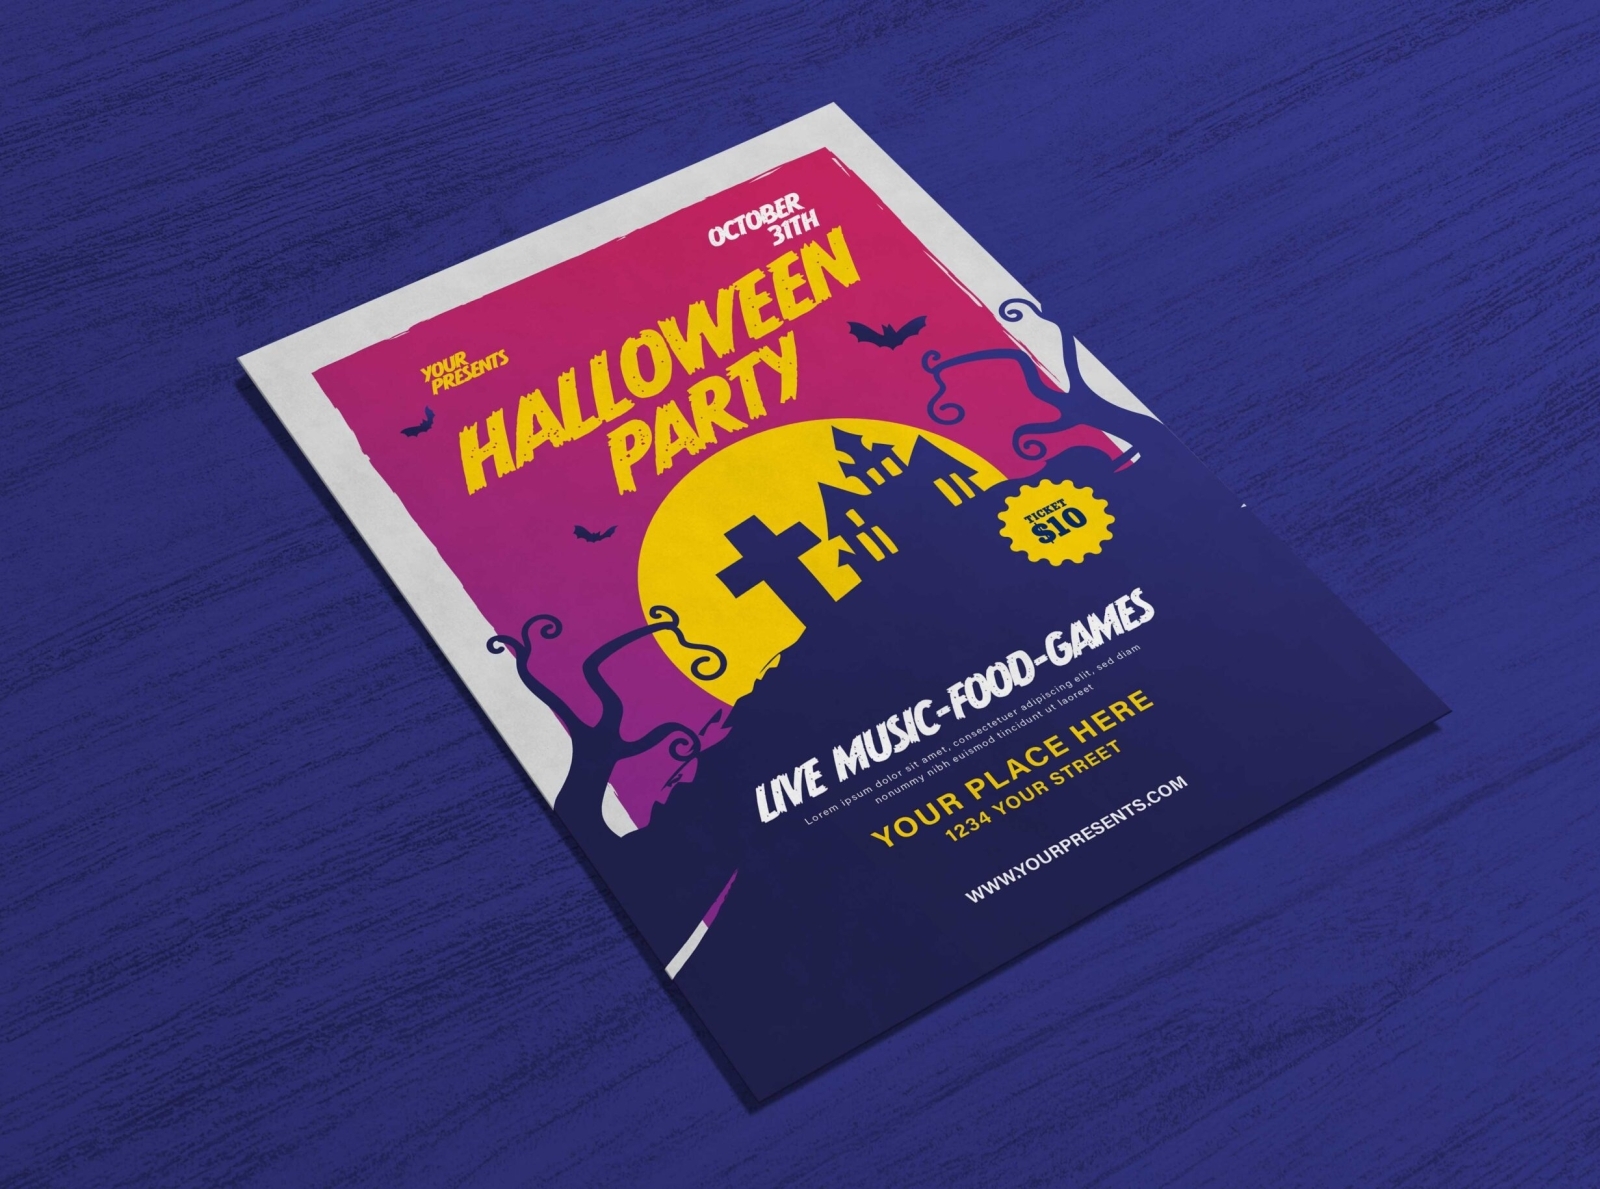 Haunted House Party Halloween Flyer 2020 Scaled 4x 